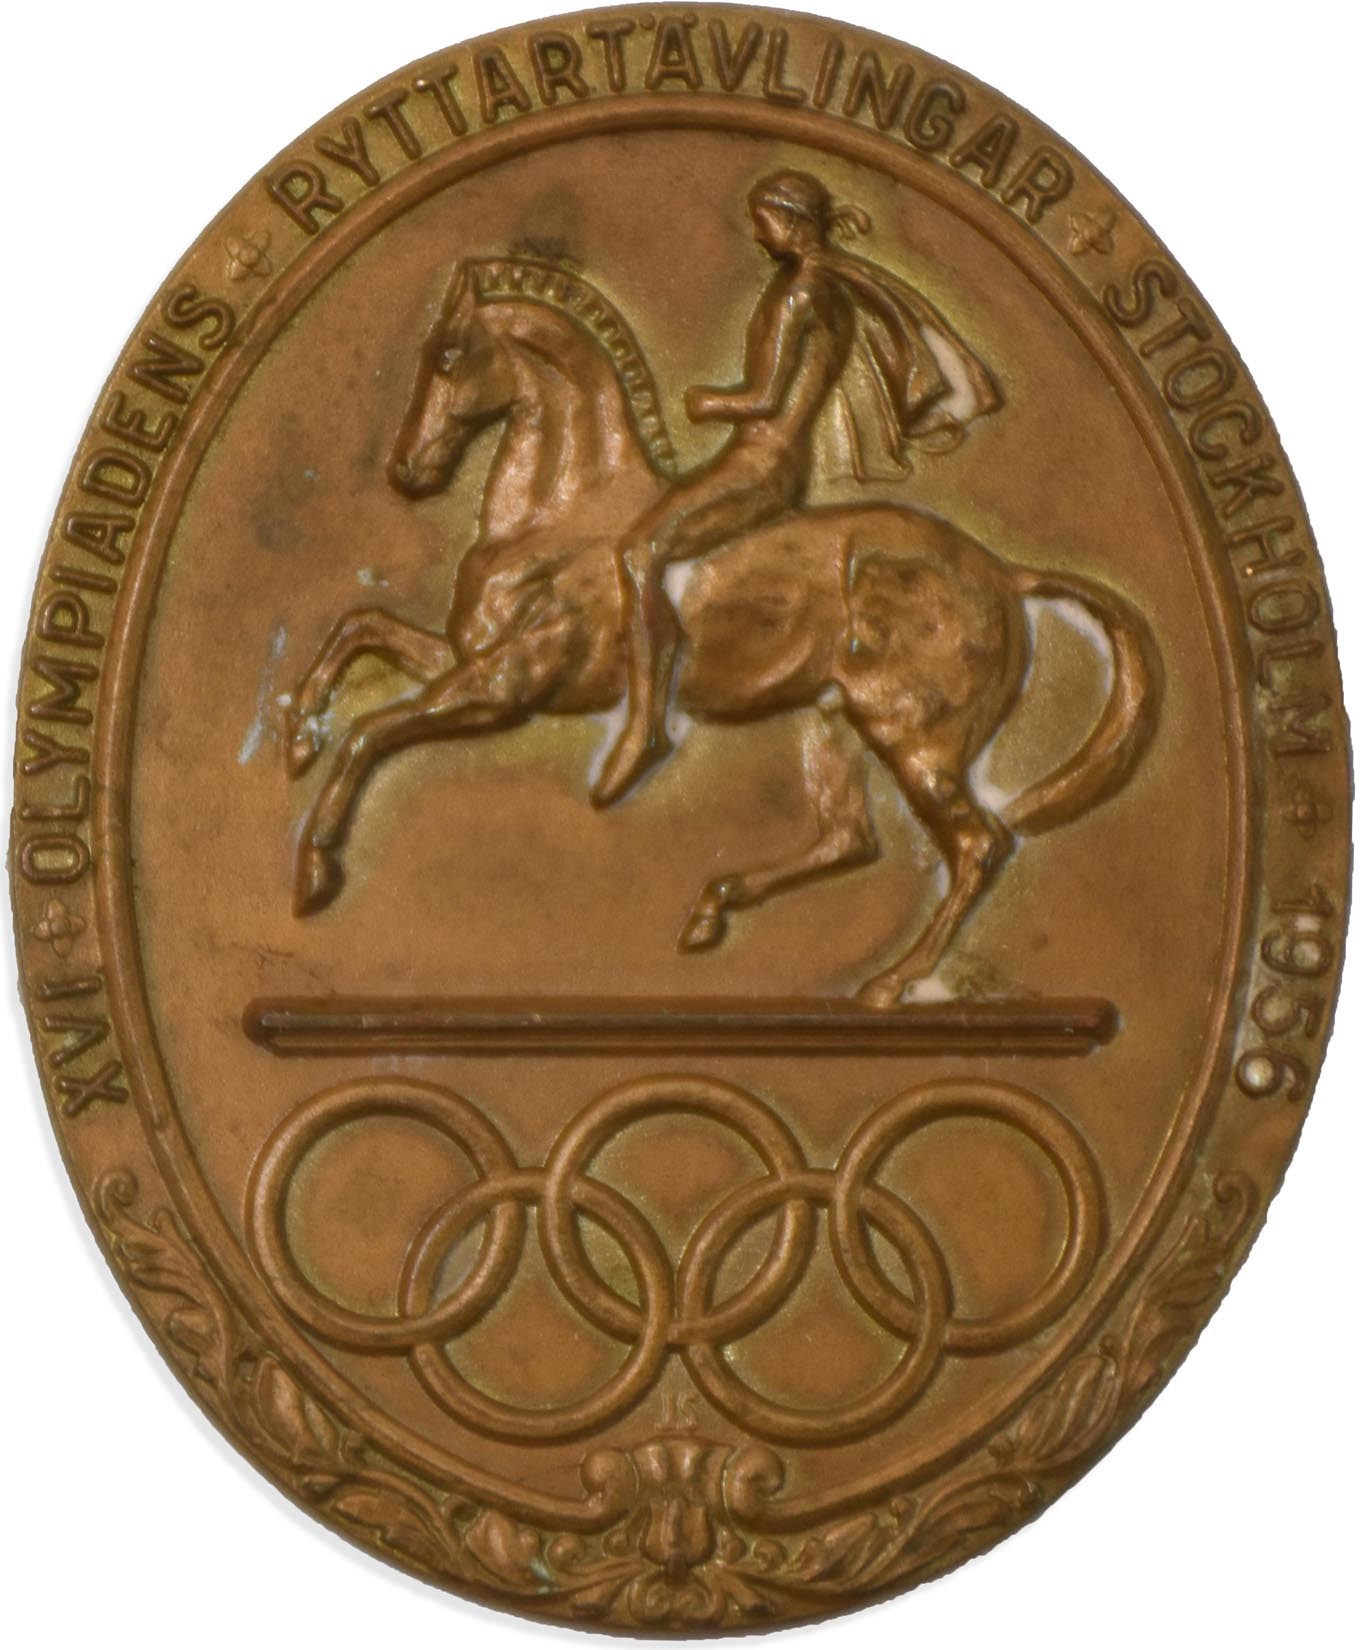 Horse Racing - 1956 Melbourne Summer Olympics Equestrian Participation Medal - Held in Stockholm